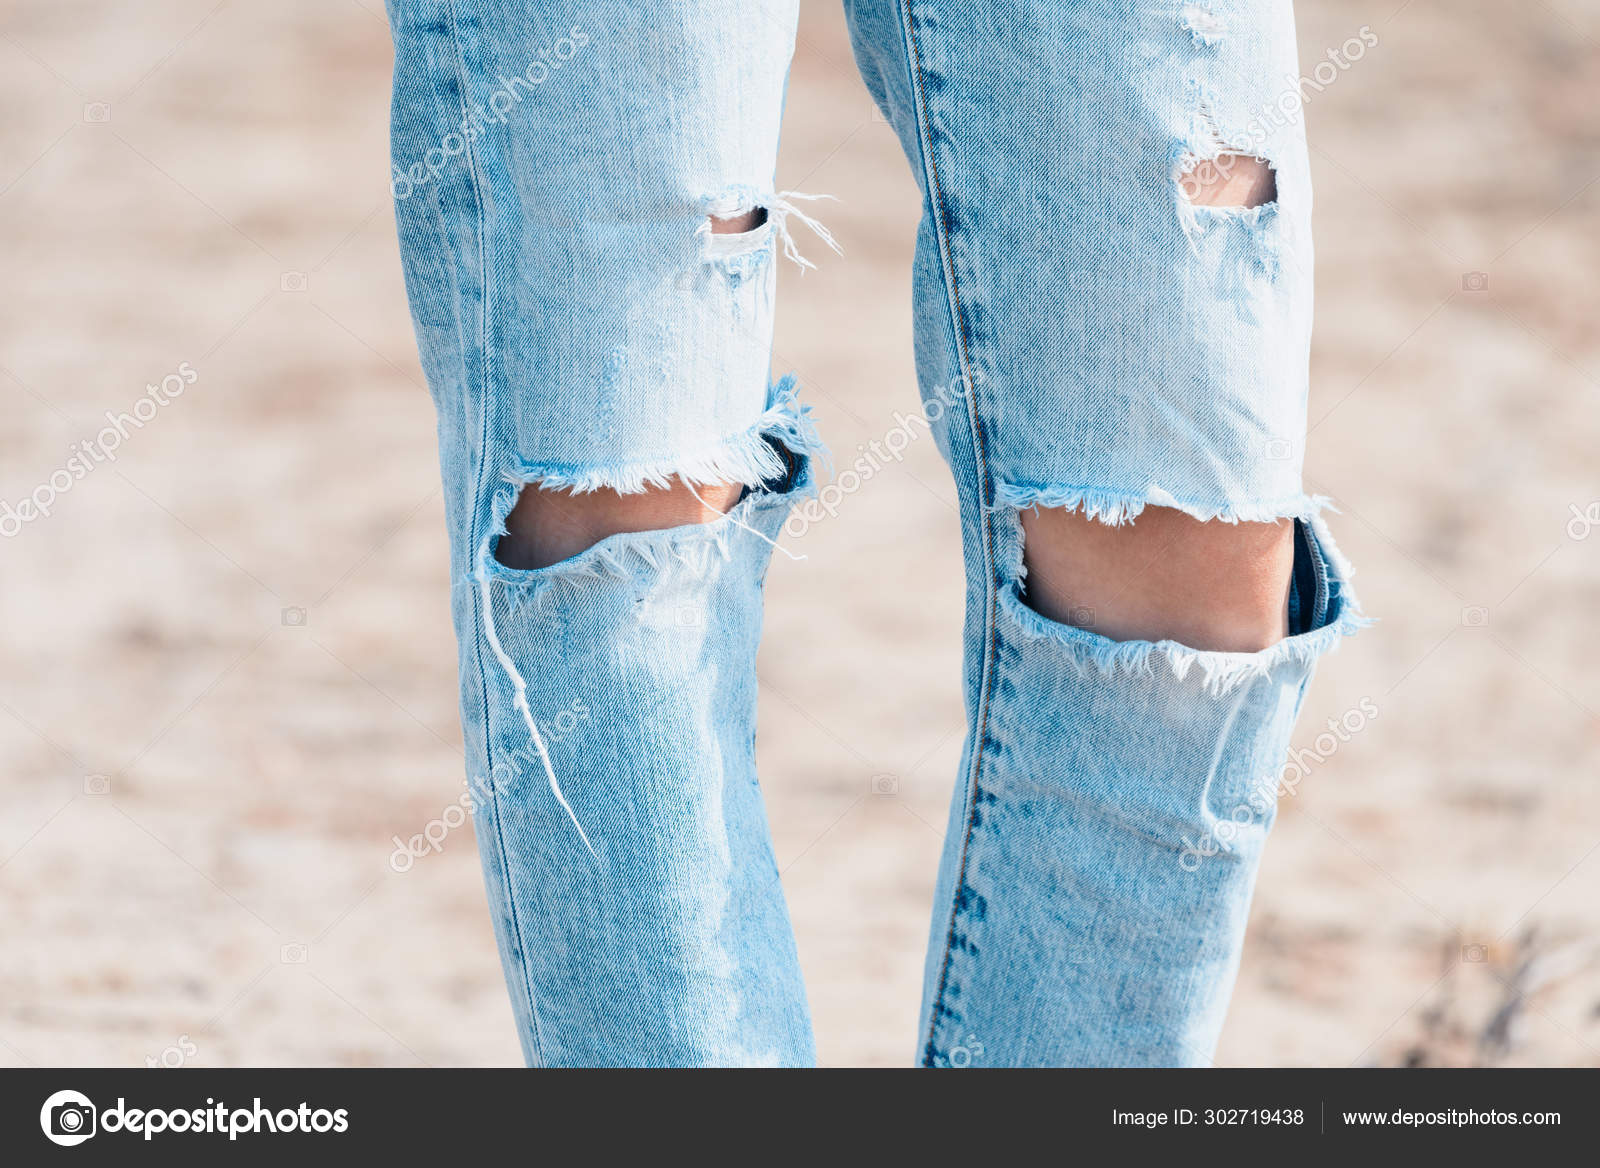 holey jeans